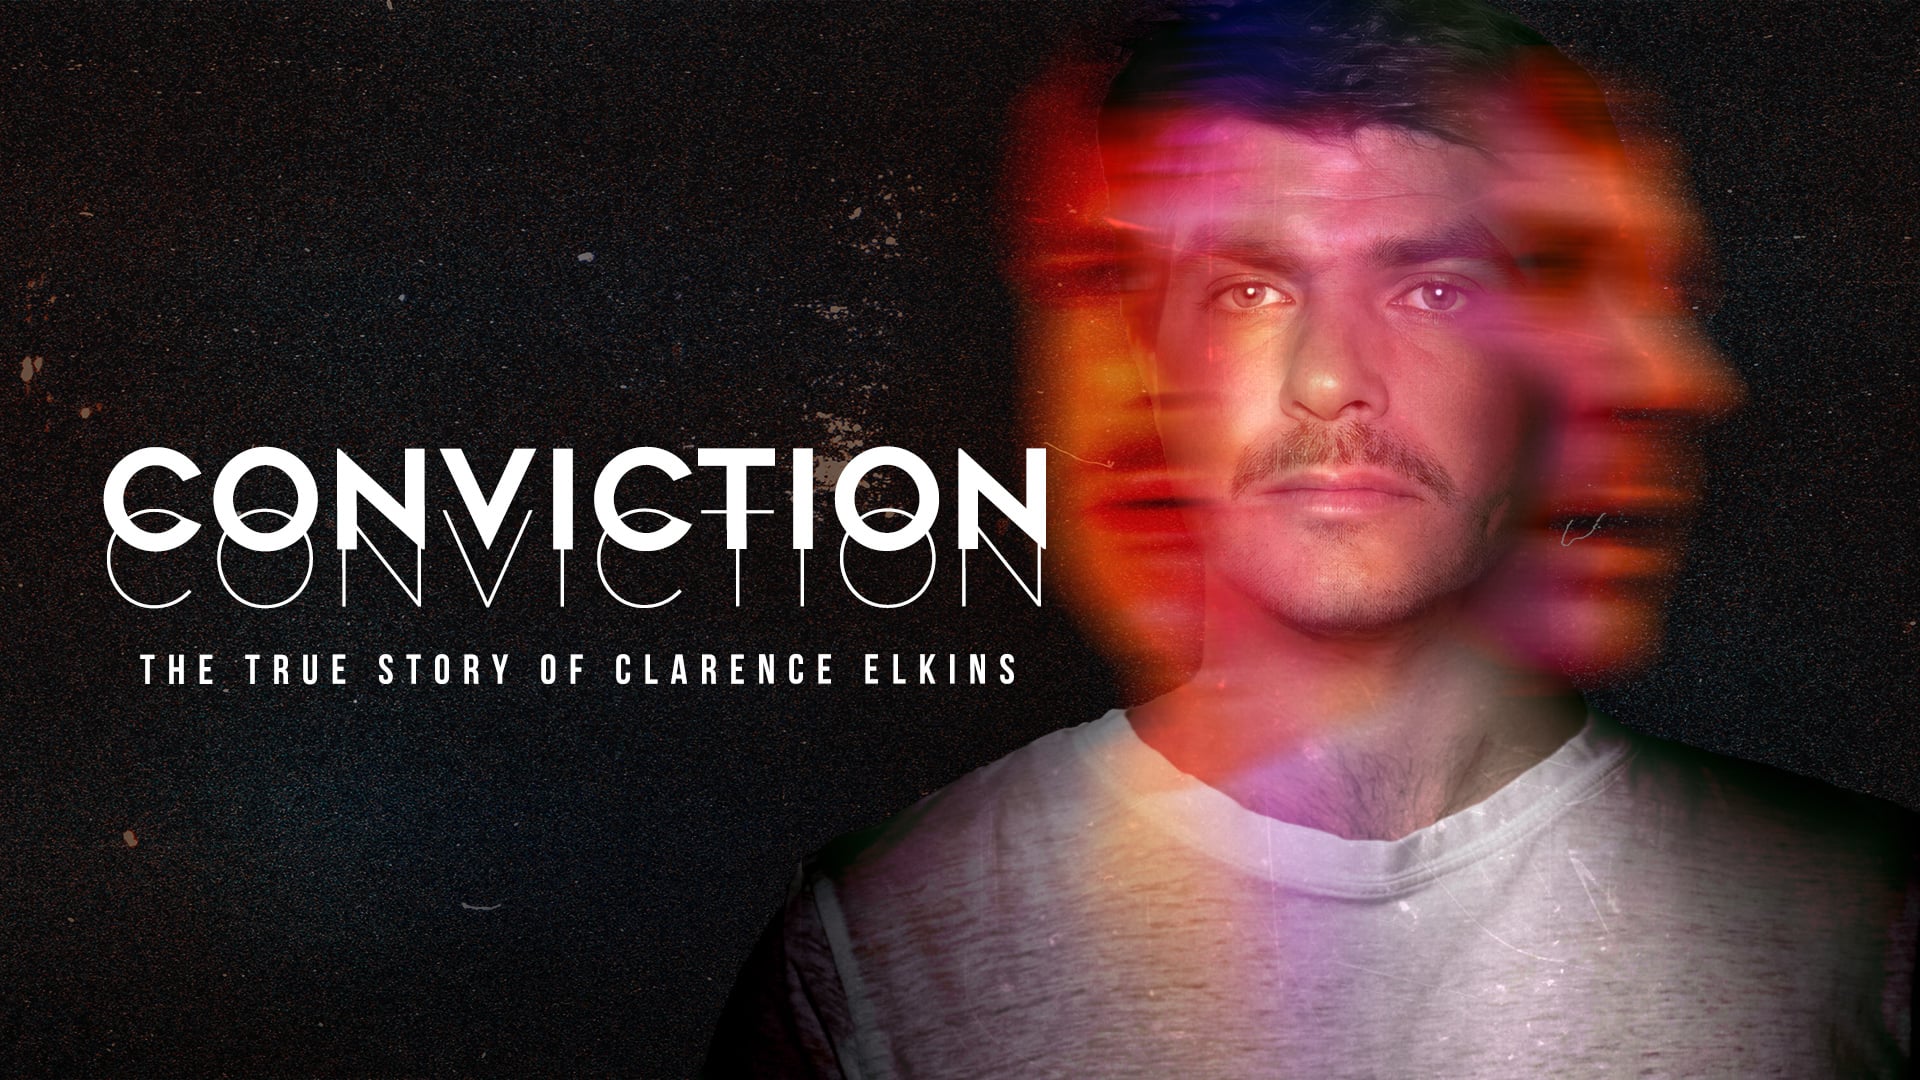 Conviction: The True Story of Clarence Elkins - Trailer